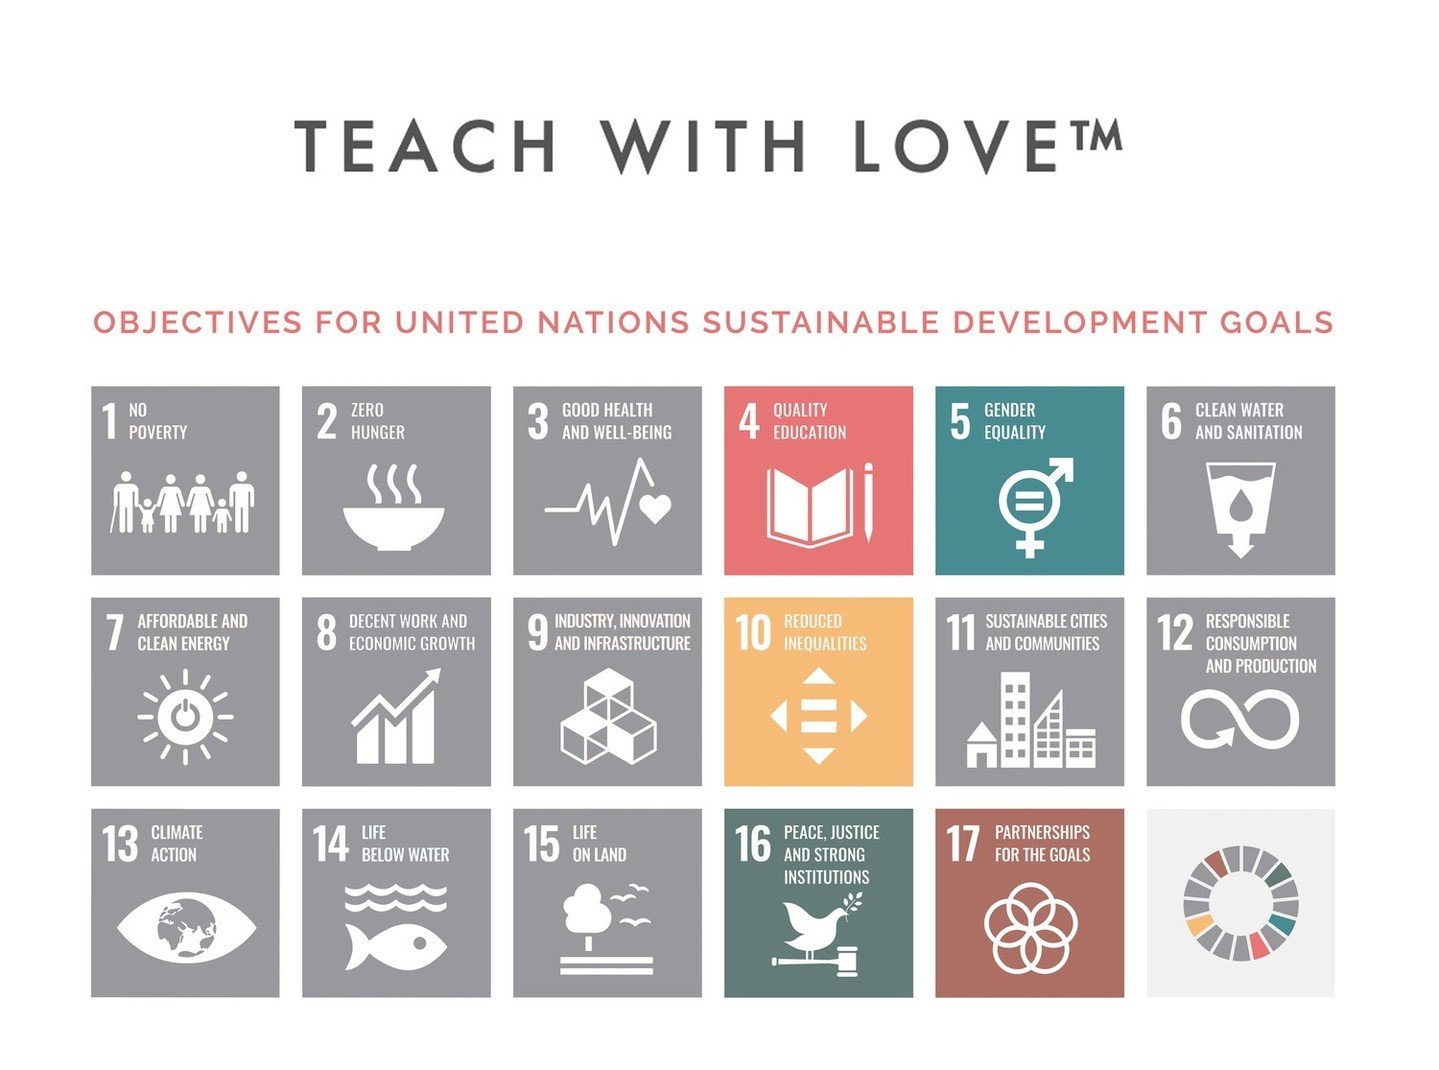 Did you know that there&rsquo;s a powerful link between the work we do at @teachwithlove and the UN's Sustainable Development Goals?⁠
⁠
Our L.O.V.E. framework (Lift Others Voices Every day&trade;️) weaves seamlessly with the United Nations Sustainabl